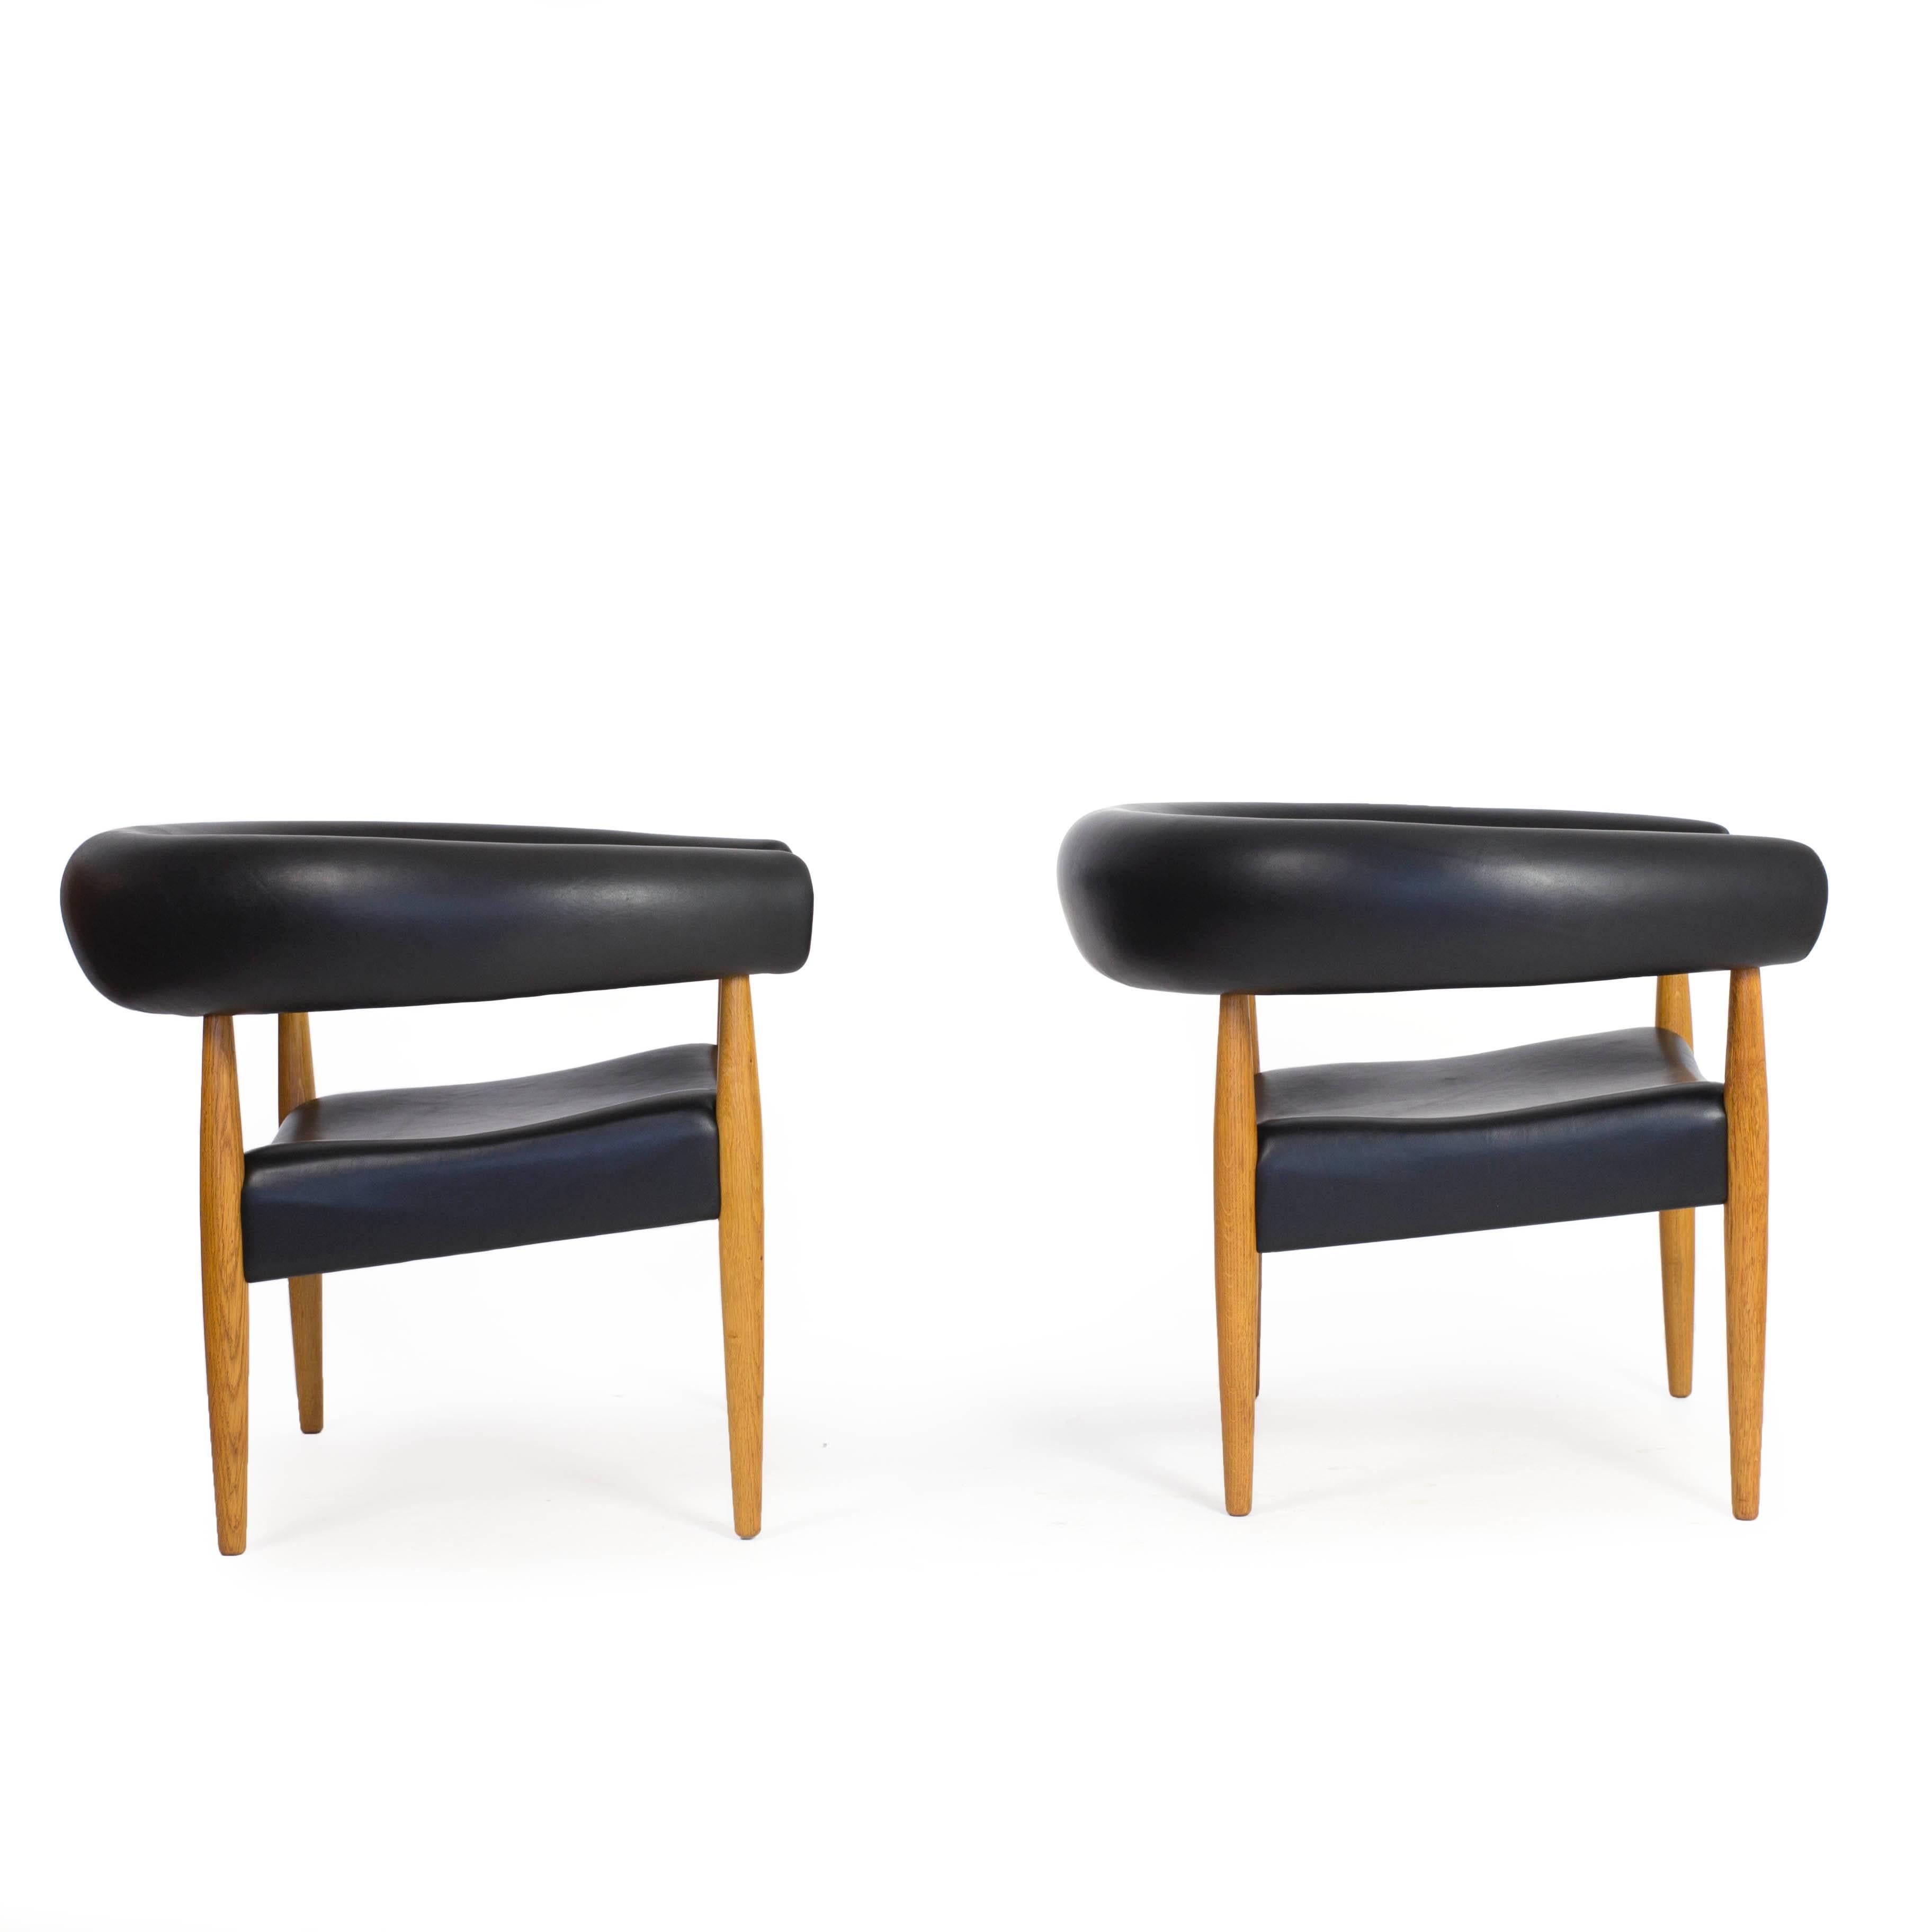 A pair of Nanna Ditzel 'Pølse stolen' with frames of oak, seat and back upholstered with black dyed natural leather. 

Designed by Nanna Ditzel 1958 as 'The sausage chair' and made by Kolds Savvaerk, Denmark. 
The later edition was renamed 'The